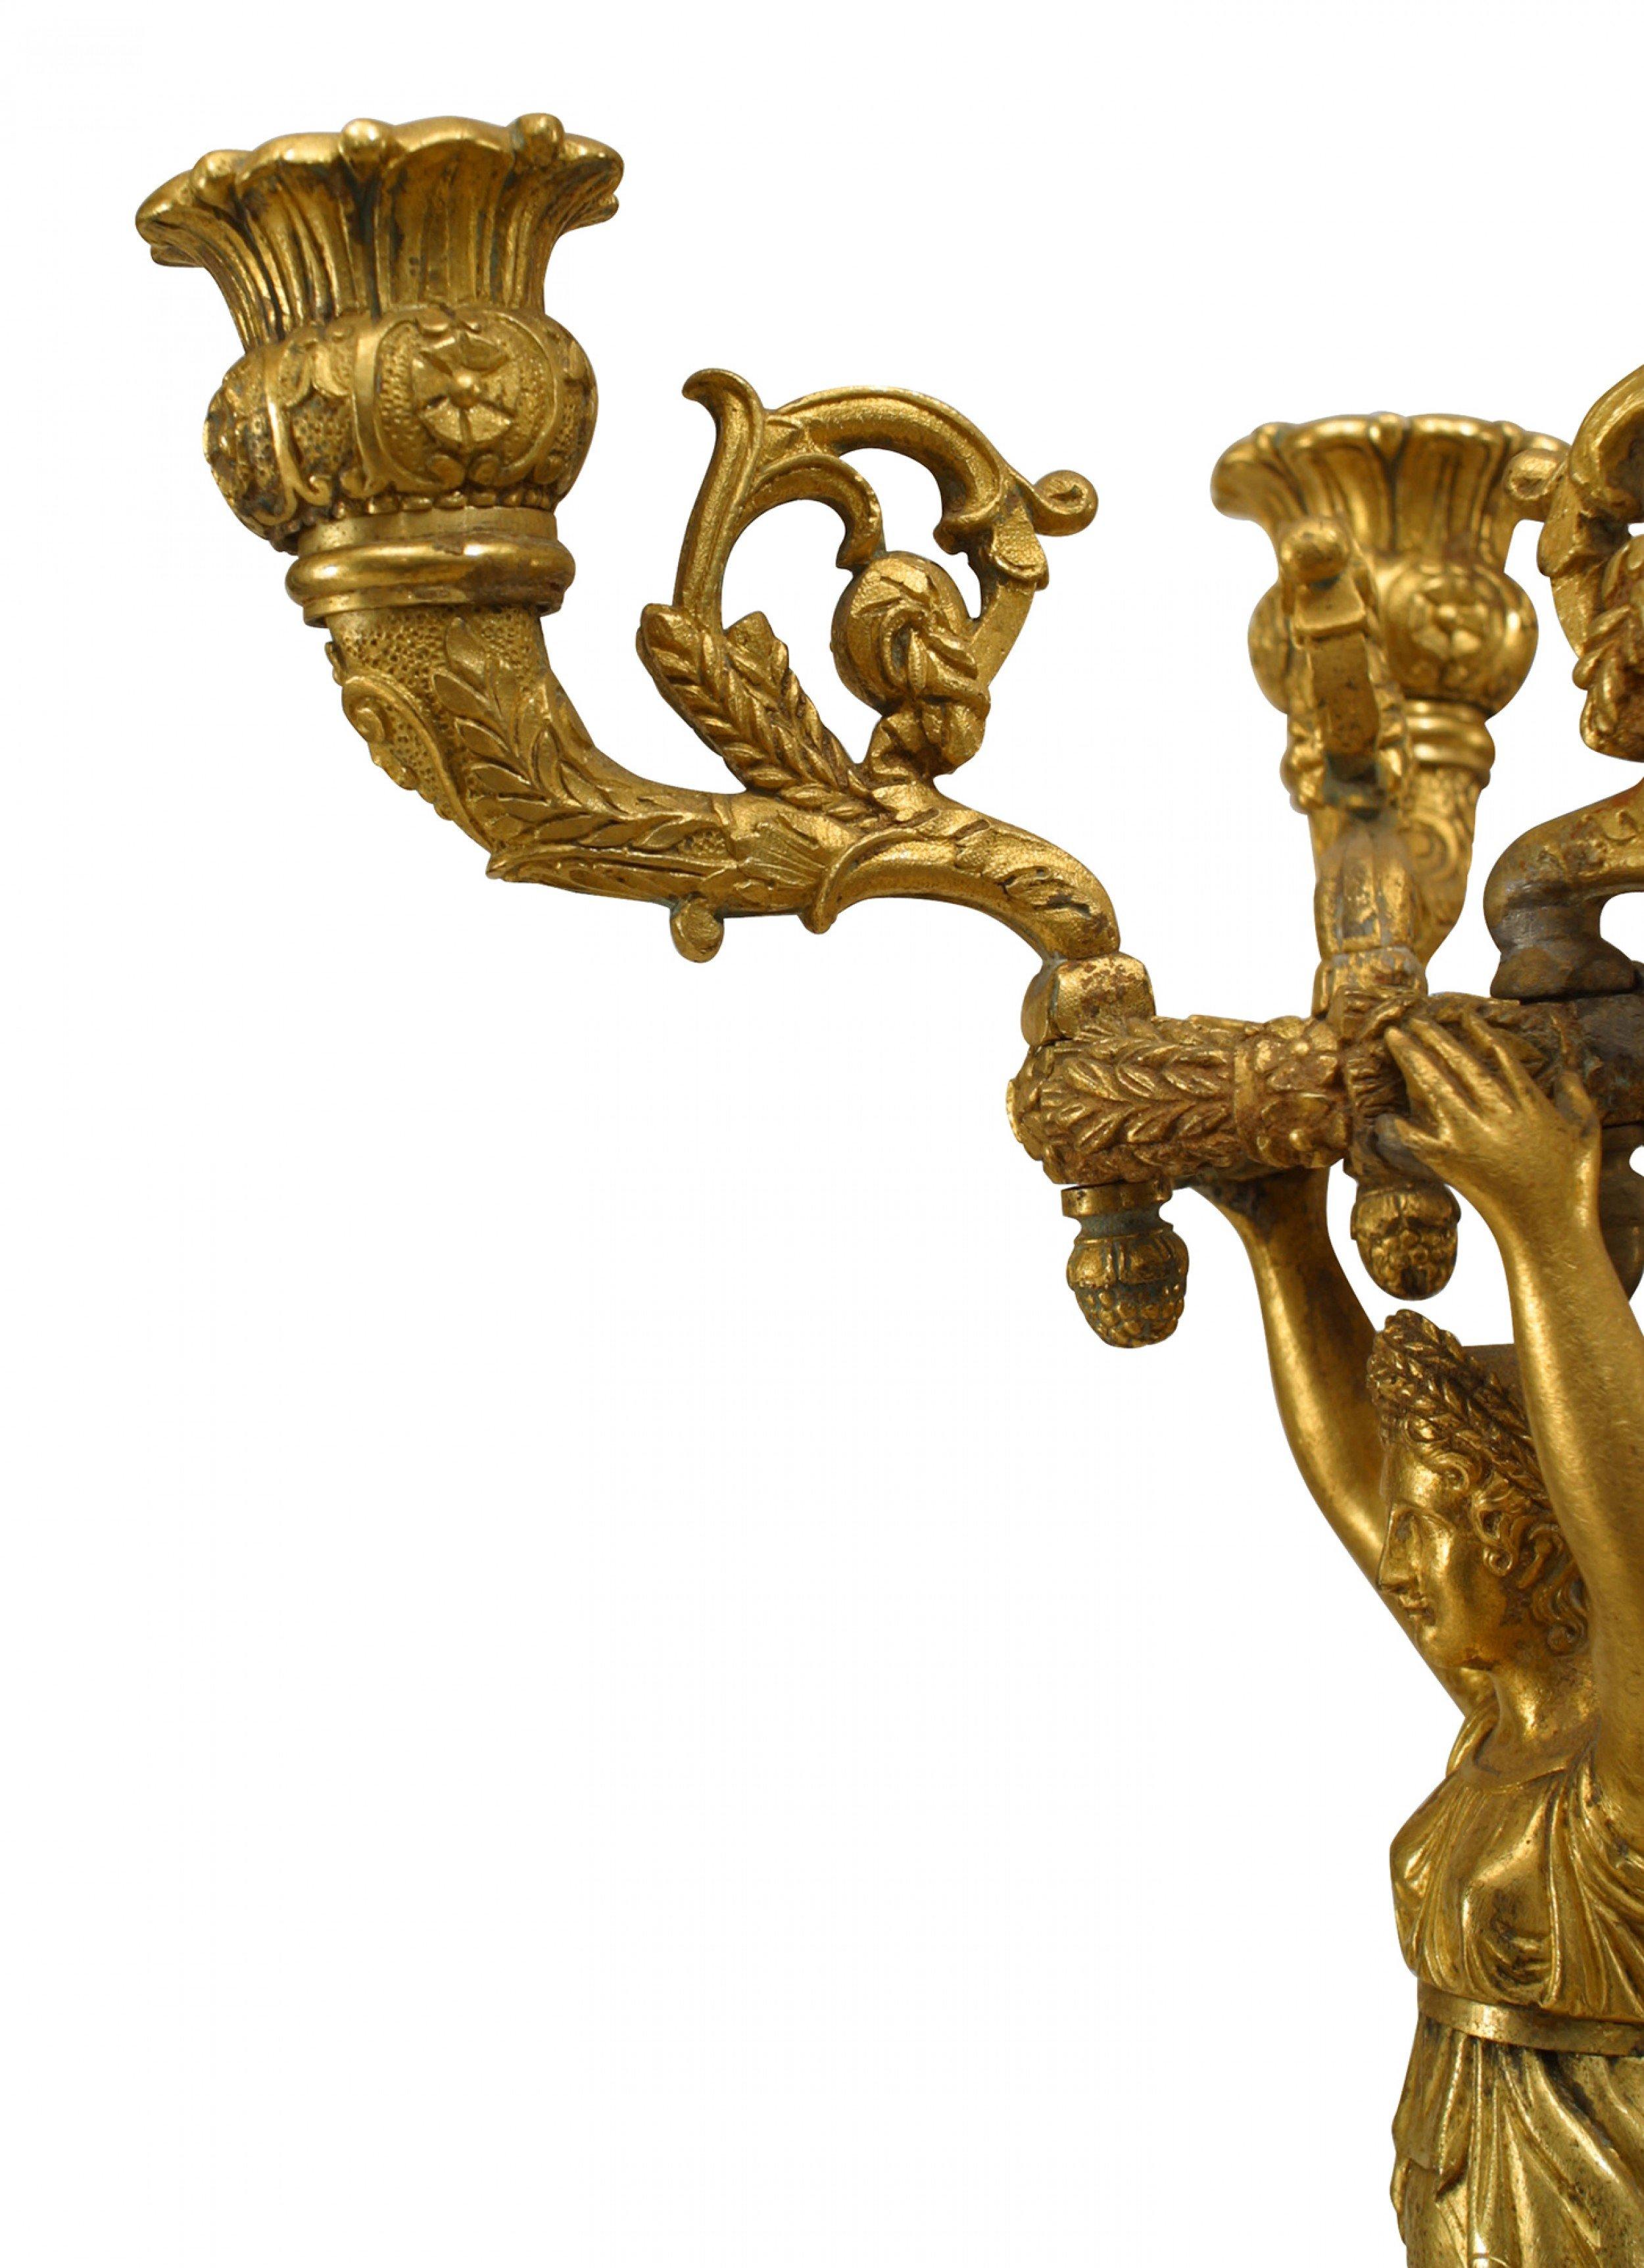 19th Century Pair of French Empire Bronze Dore Candelabras with Winged Figures For Sale